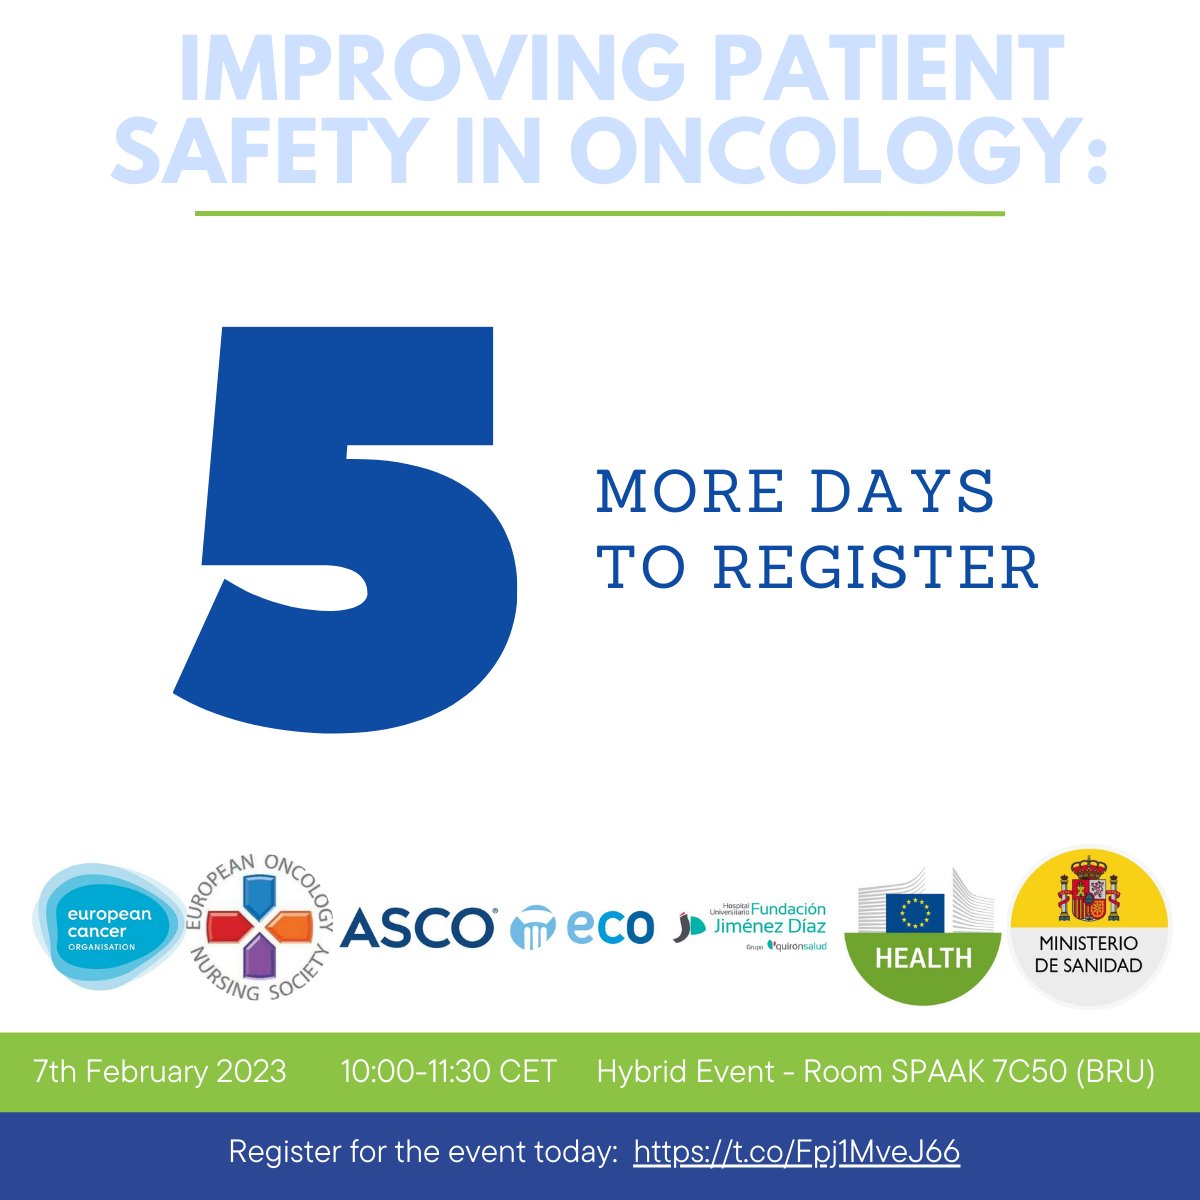 Only FIVE more days until our Parliament event calling on the @EU_Commission to strengthen #HealthCareSystems by adding #patientsafety into Europe's #BeatCancerPlan. Register today to reserve your spot in the high-level discussion👉bit.ly/3WODU45